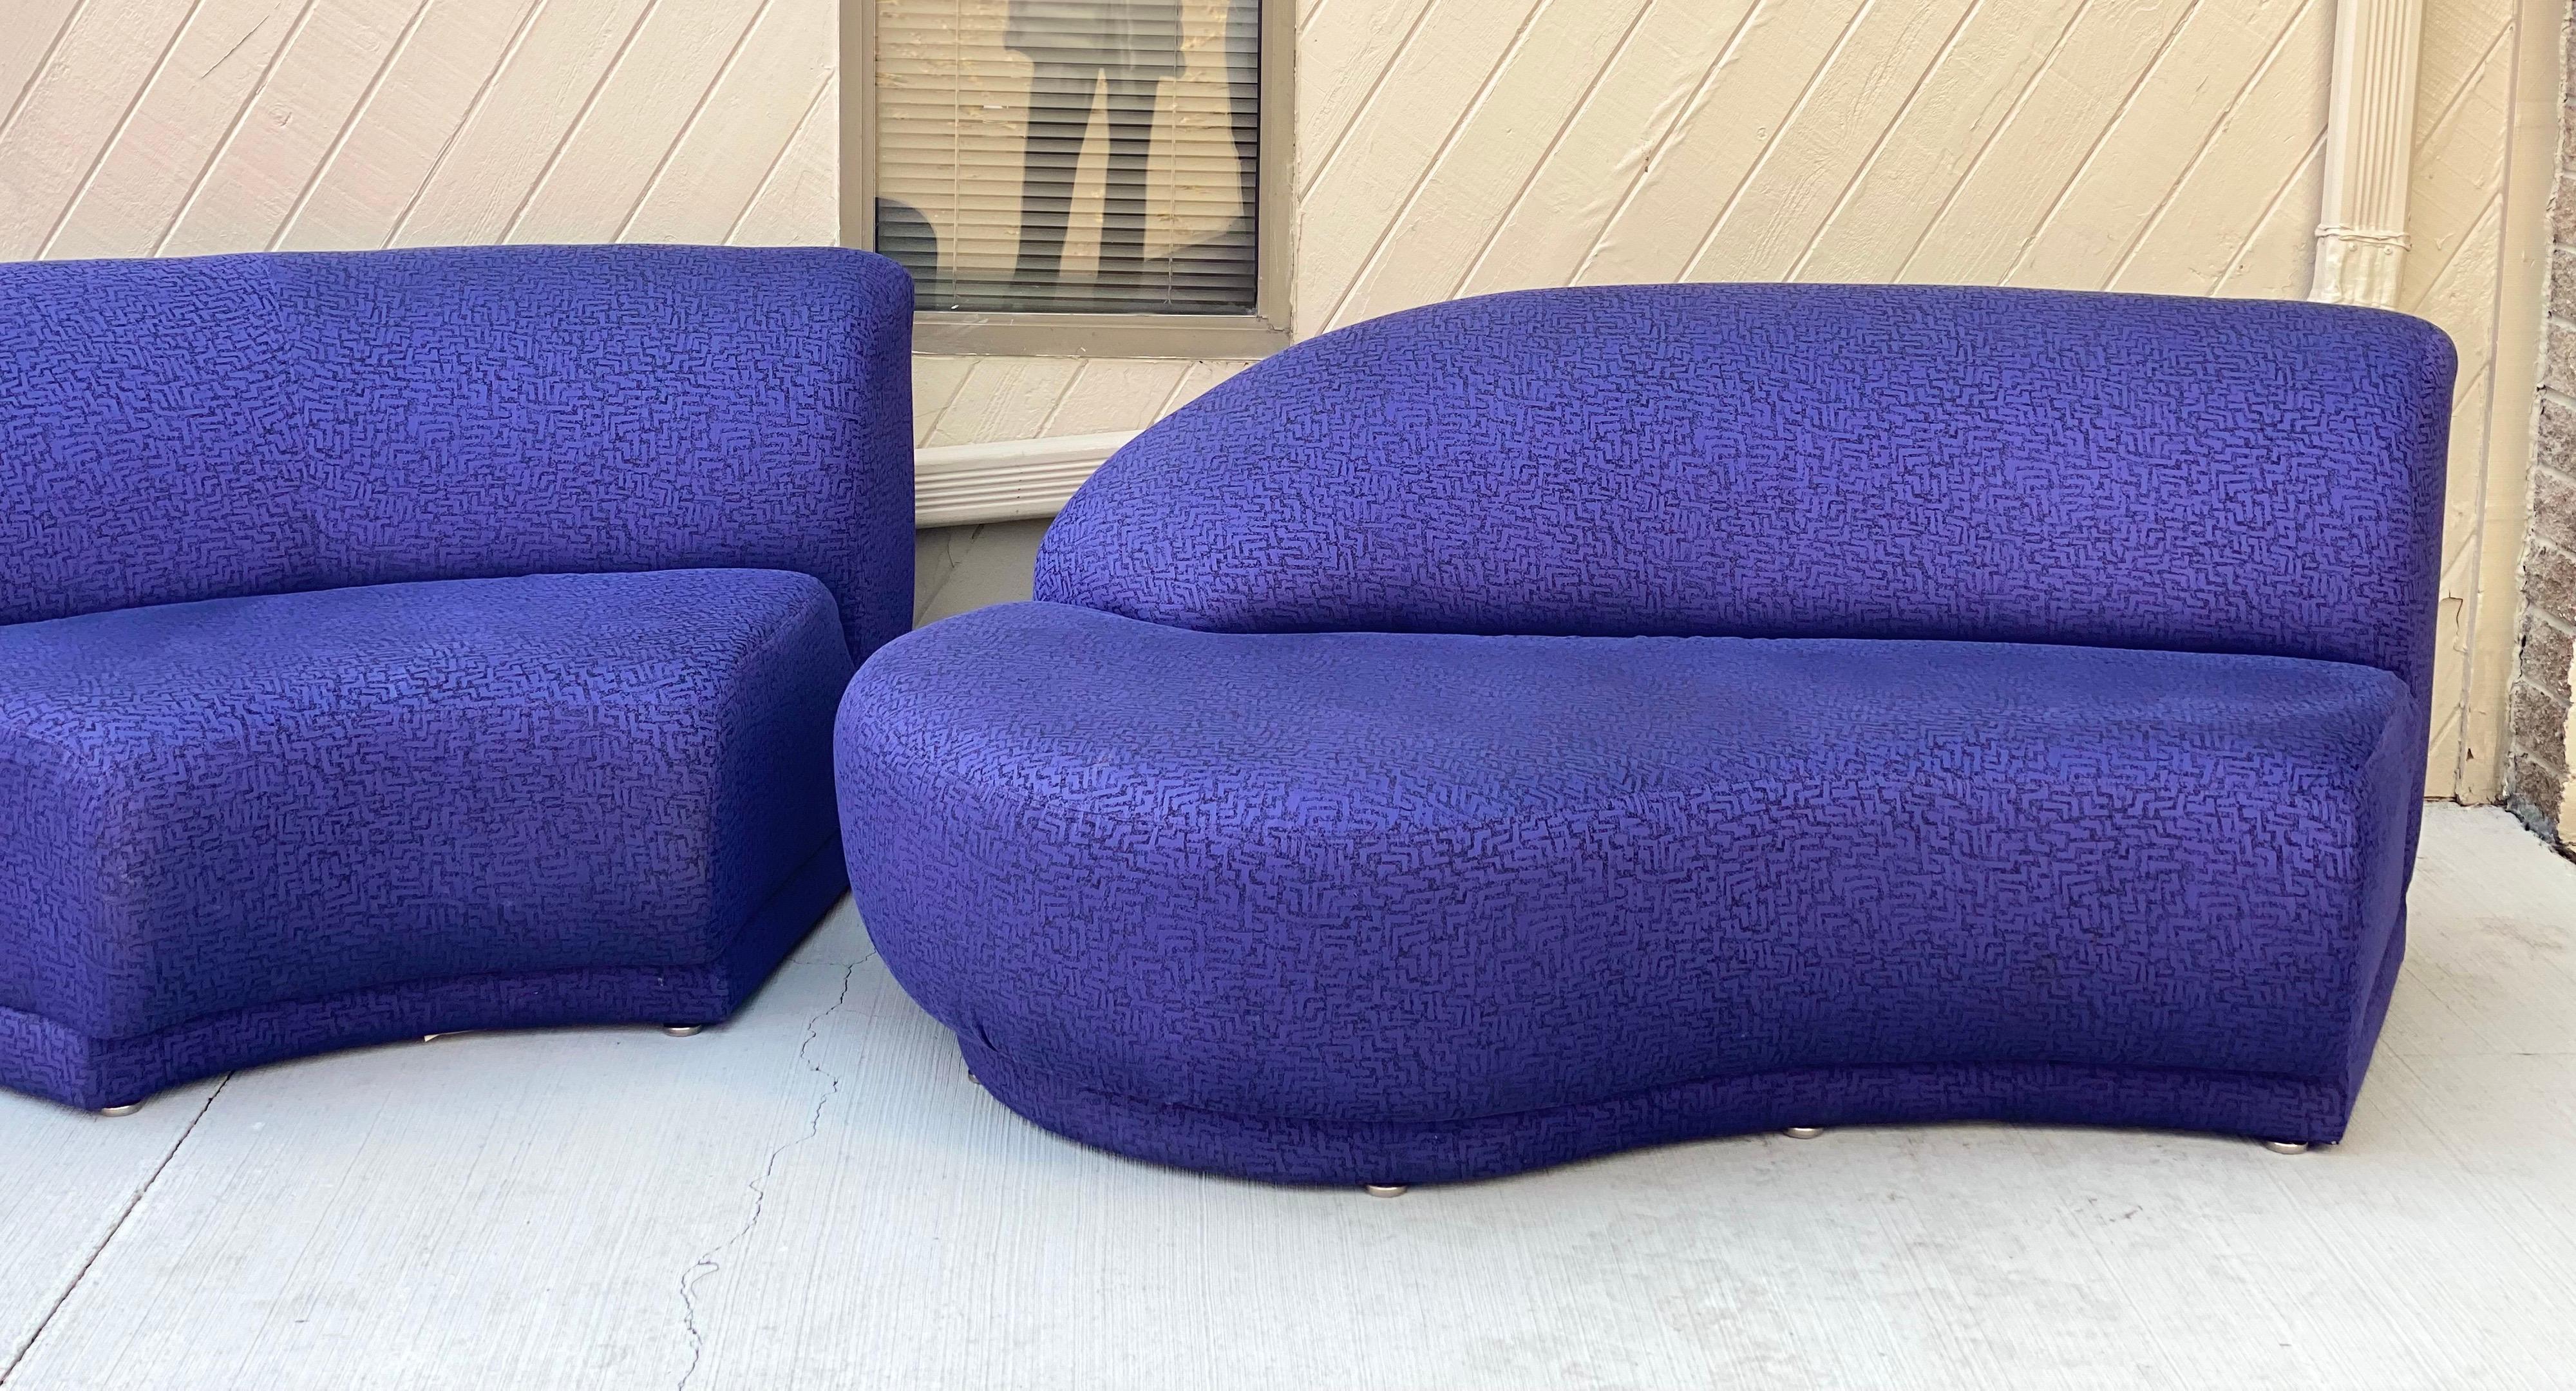 We are very pleased to offer a modern, elegant, three-piece curved sectional by Ransom Culler for Thayer Coggin, circa the 1990s. Built for laidback lounging, the 